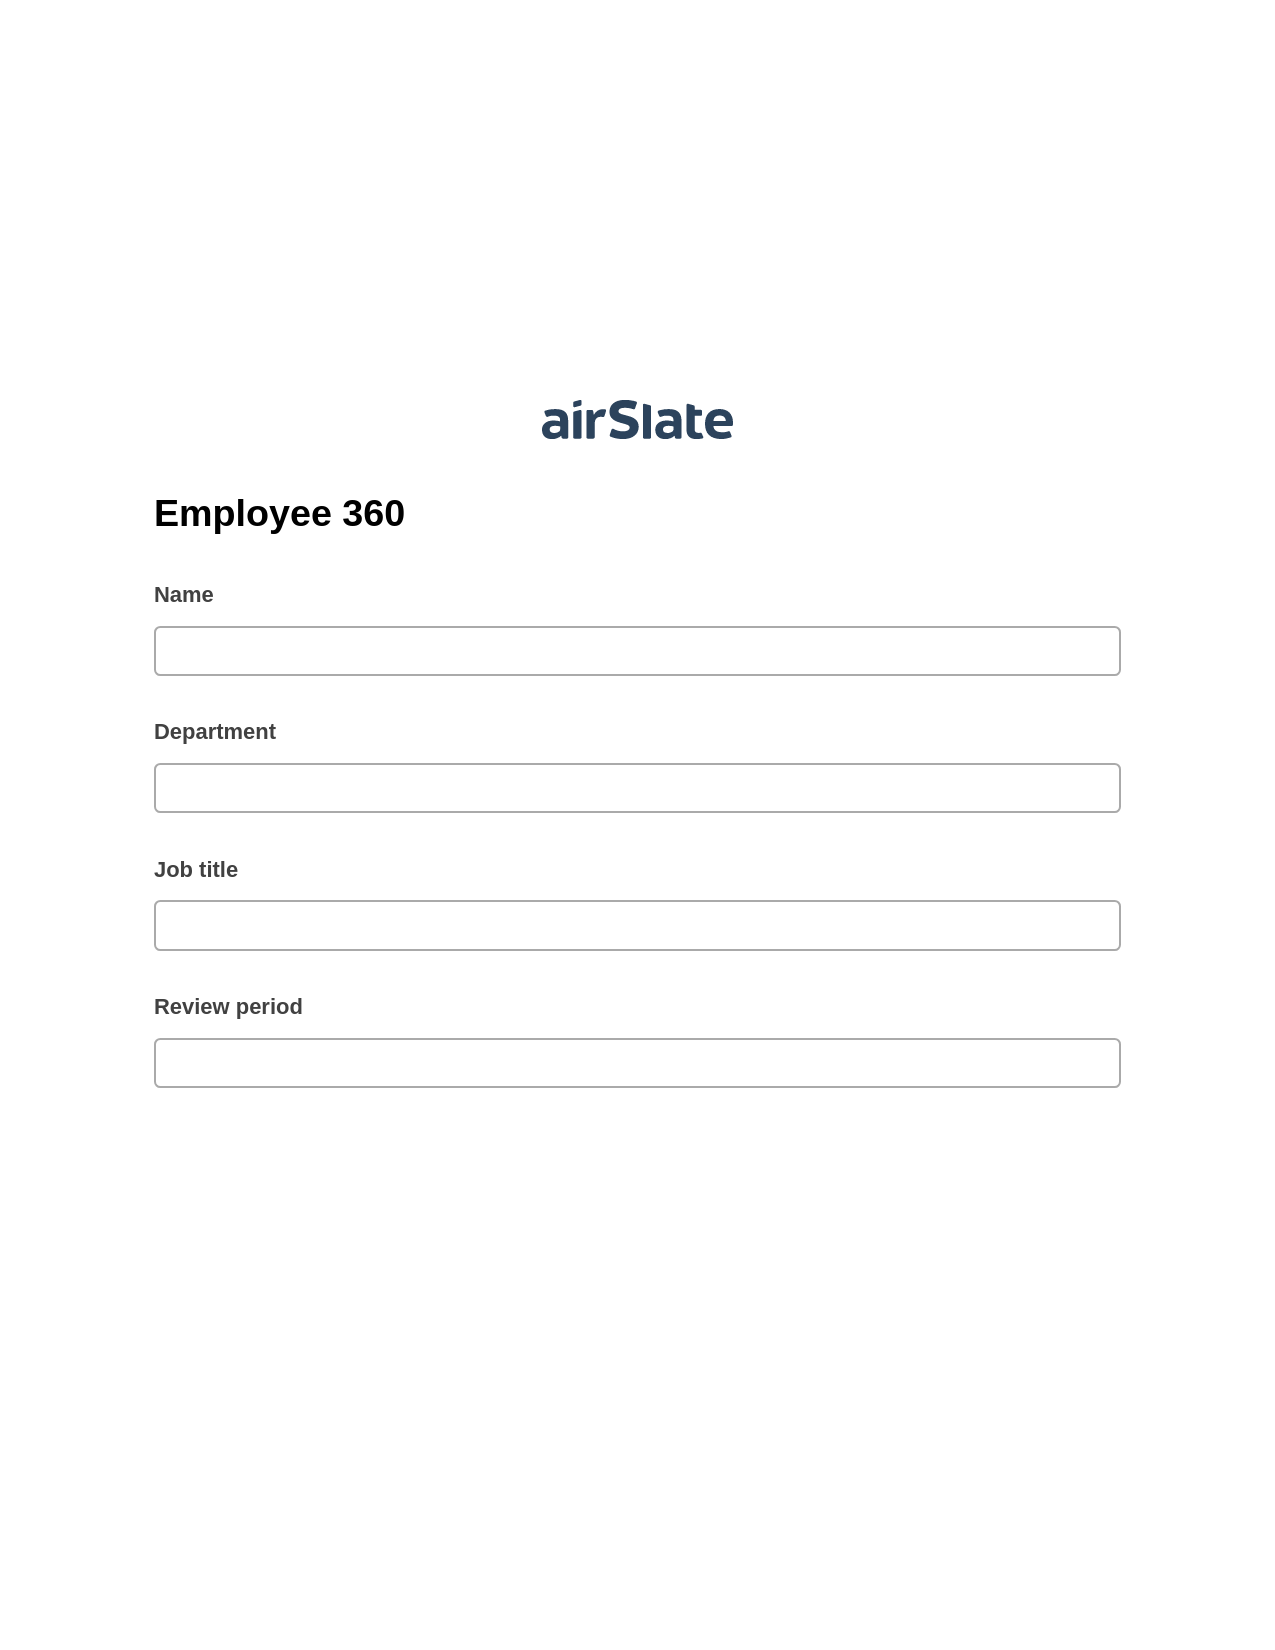 Multirole Employee 360 Pre-fill from CSV File Bot, Create MS Dynamics 365 Records Bot, Export to Smartsheet